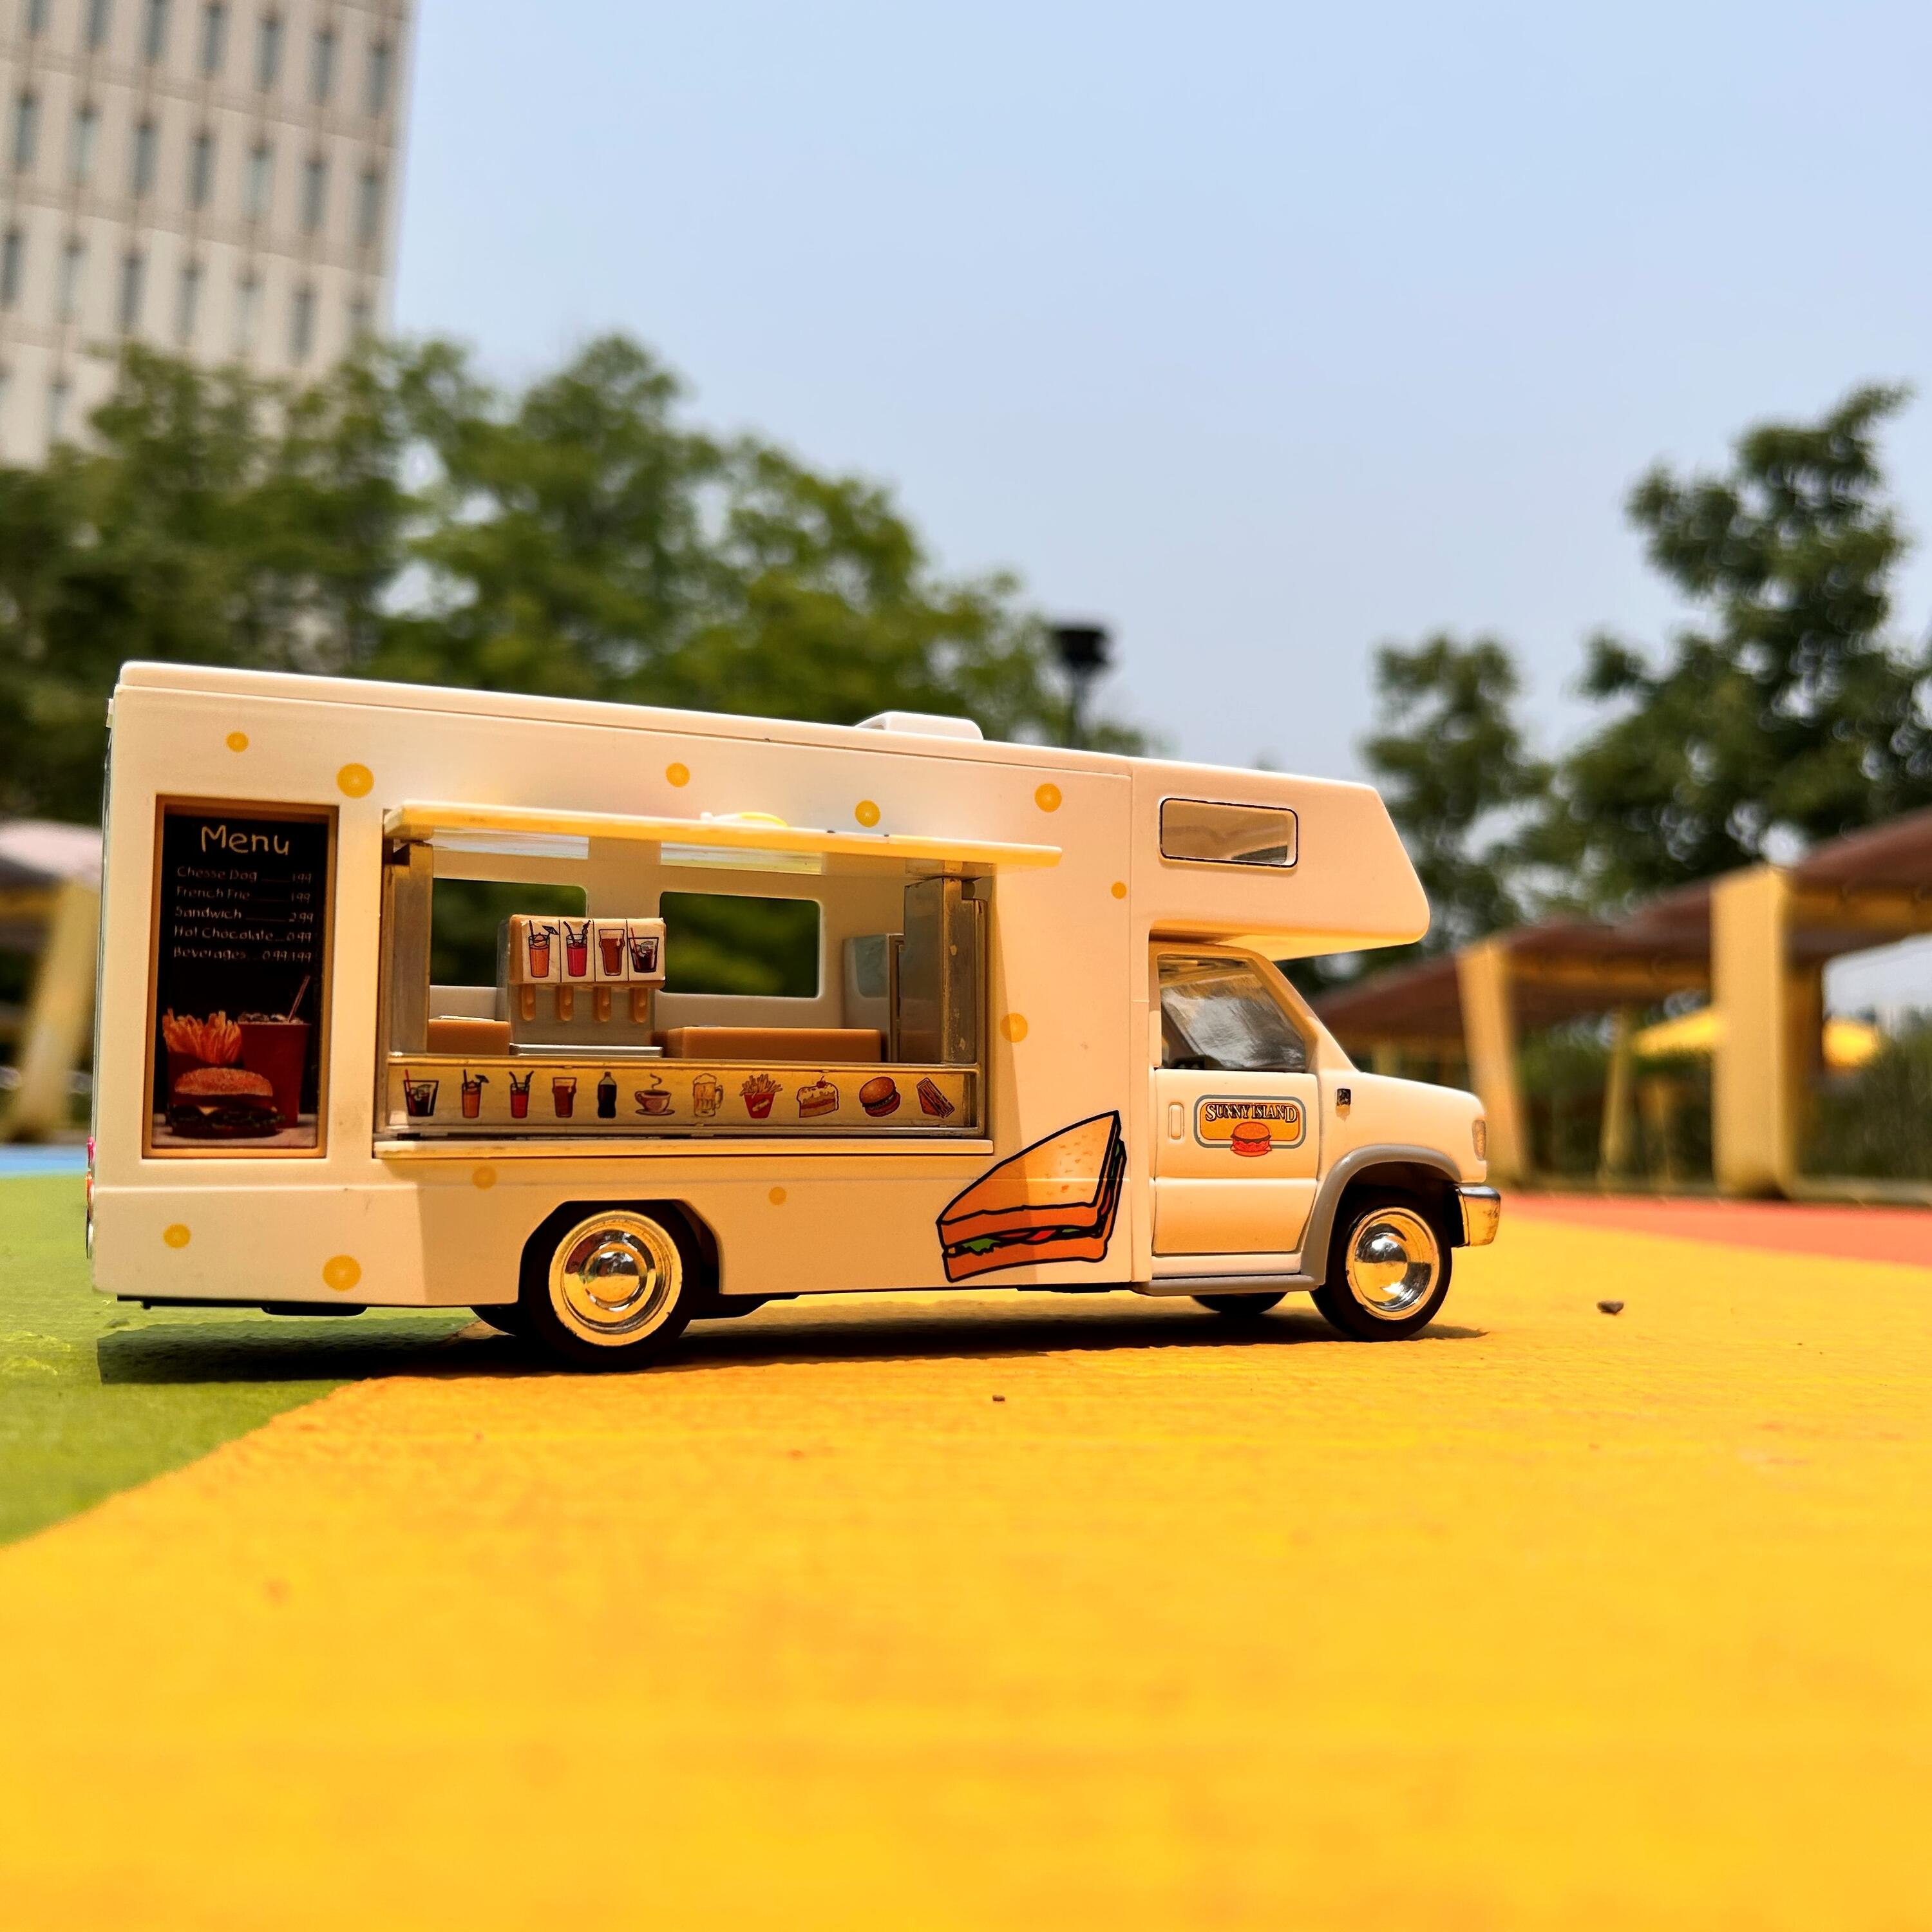 Toy food truck on a yellow pavement with trees in the background